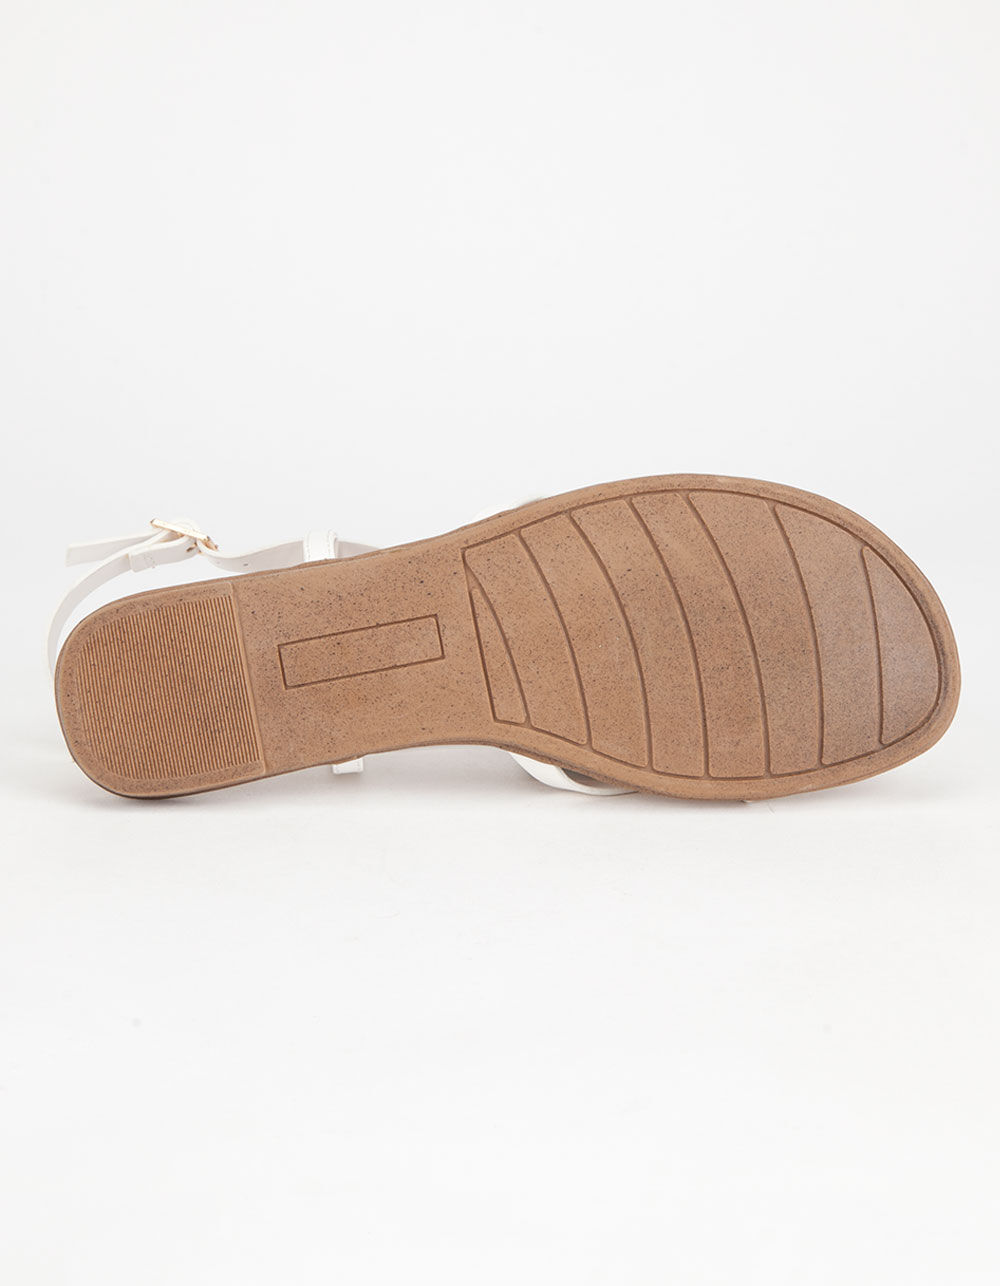 CITY CLASSIFIED Spica Womens Sandals image number 3